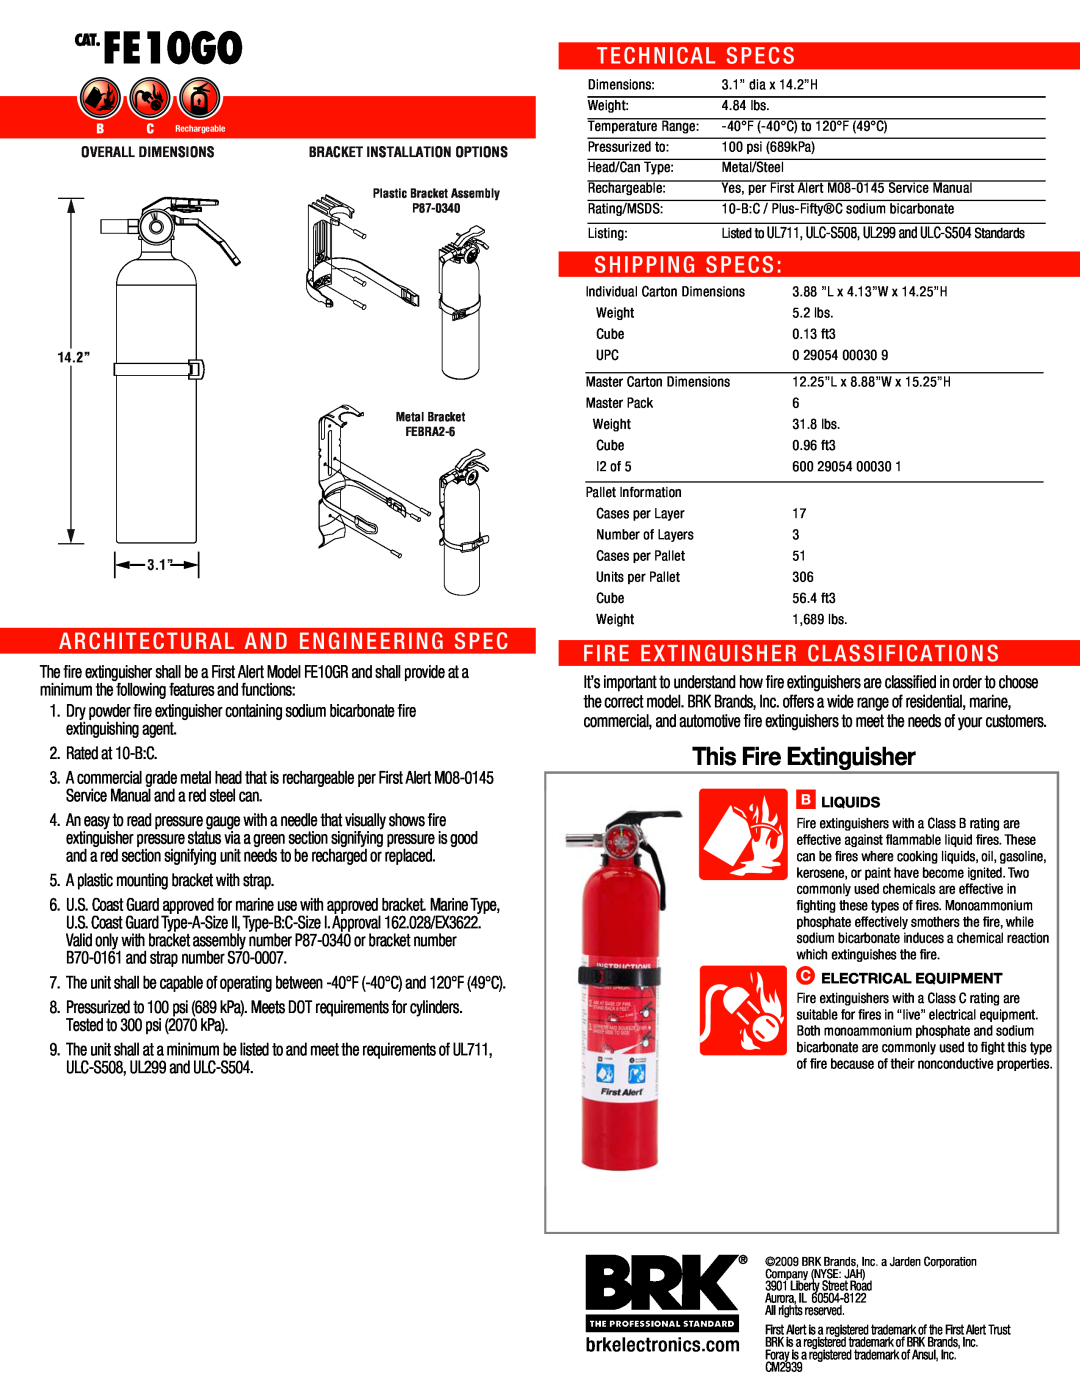 First Alert FE10GO Architectural And Engineering Spec, Technical Specs, Shipping Specs, Fire Extinguisher Classifications 